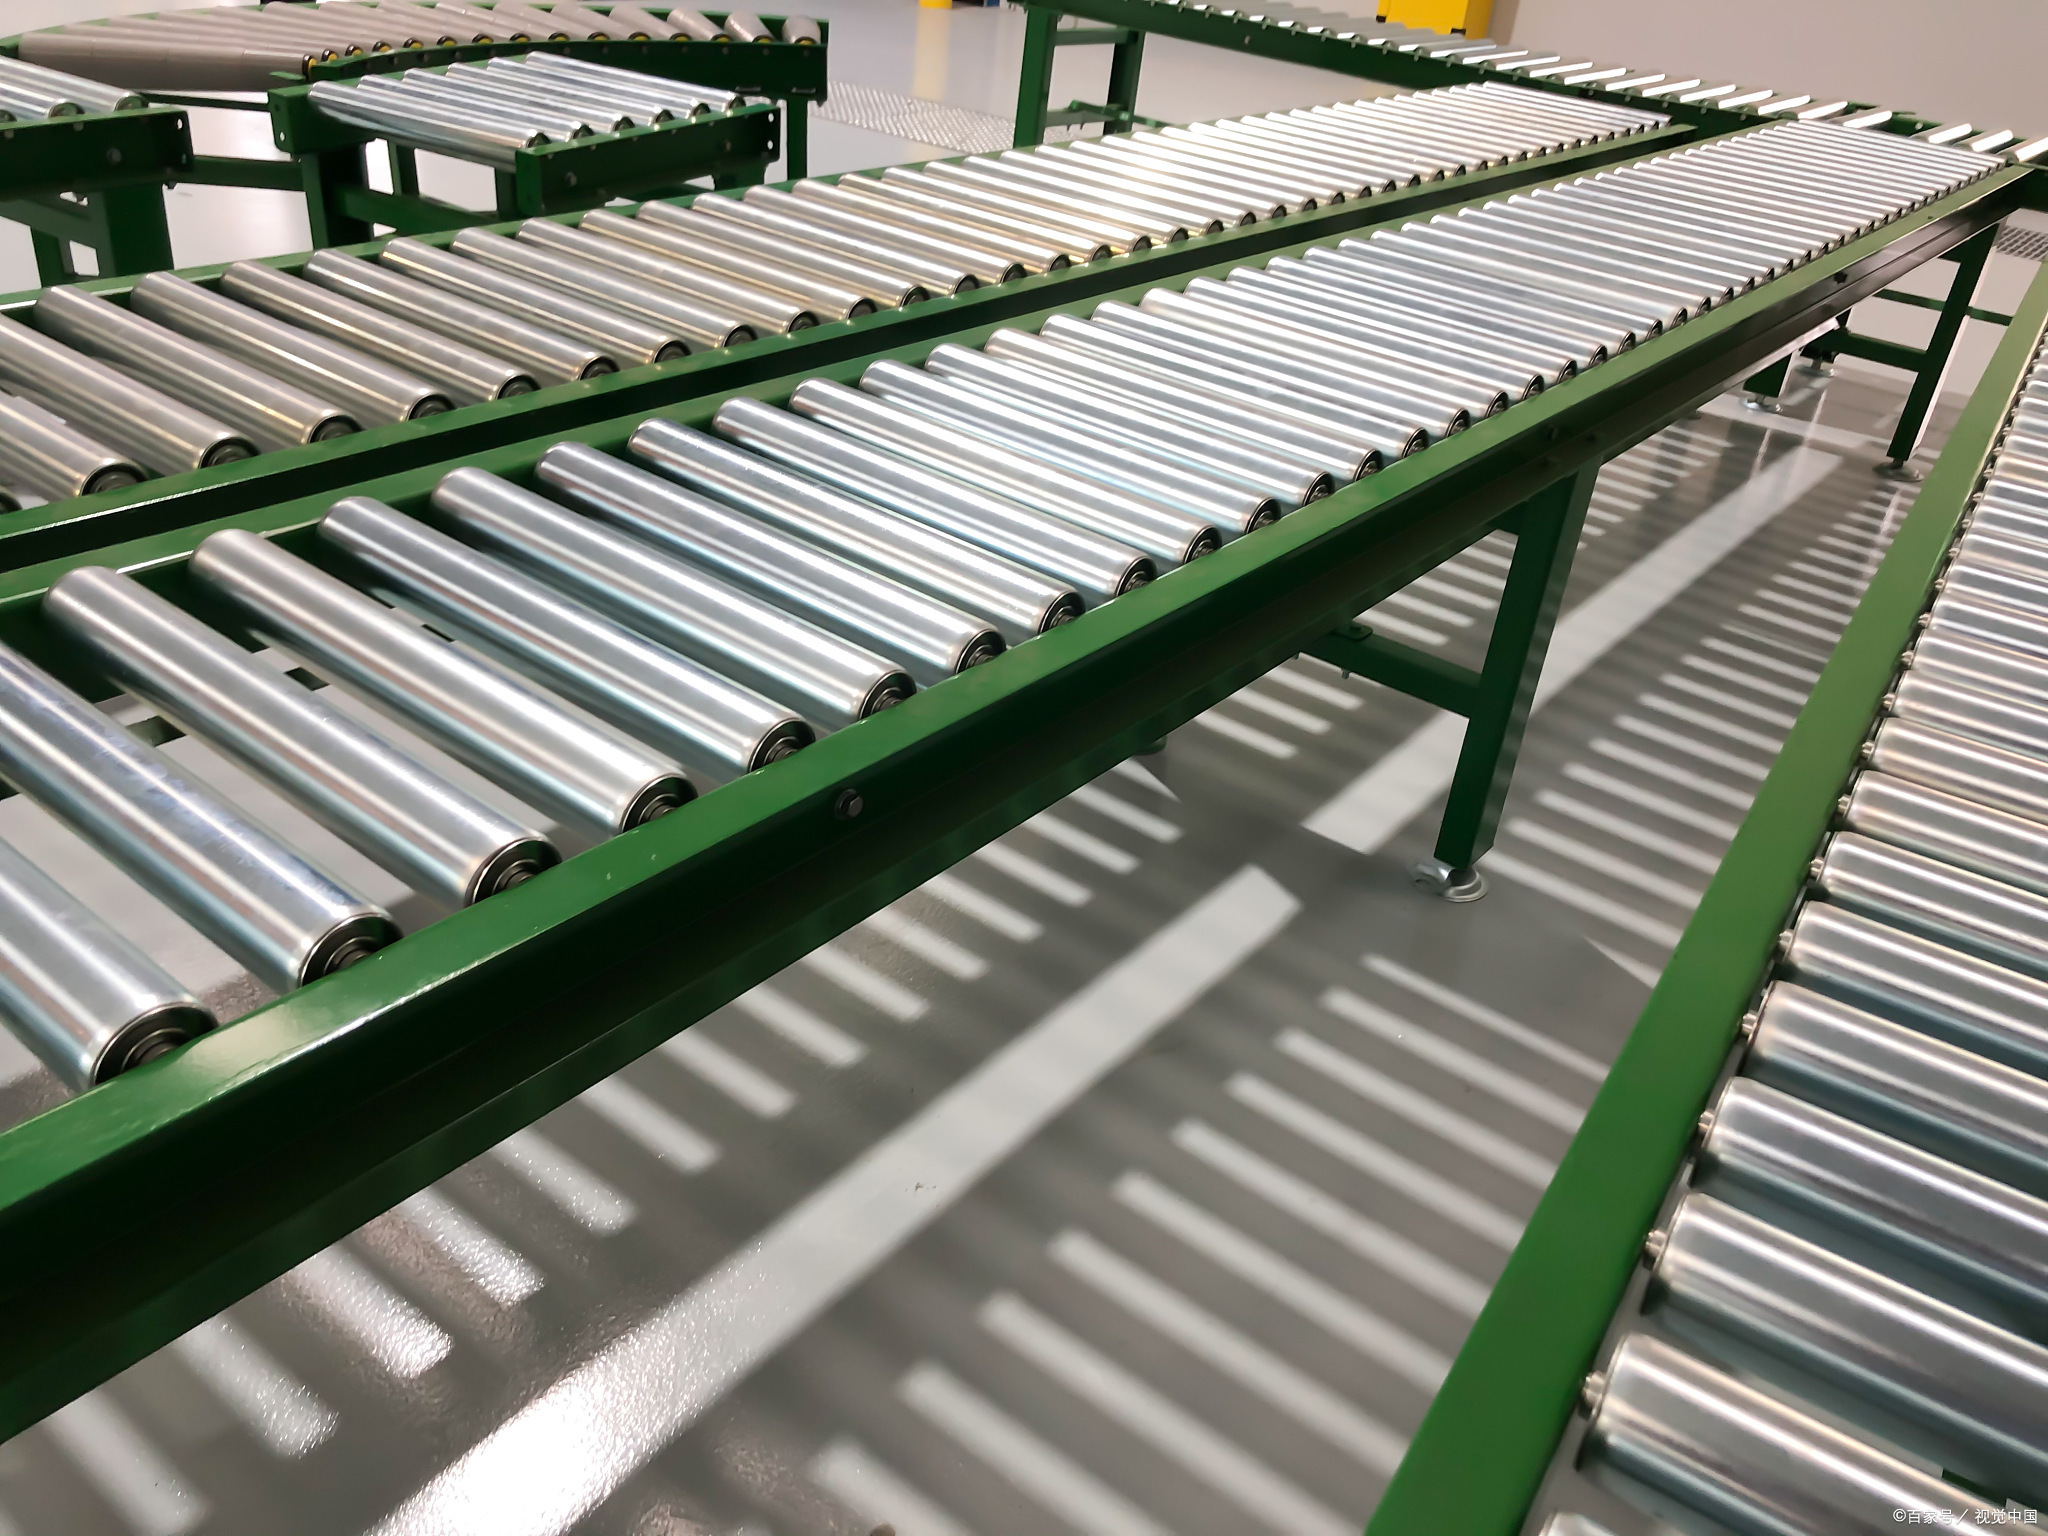 Precautions for operation and maintenance of drum conveyor lines